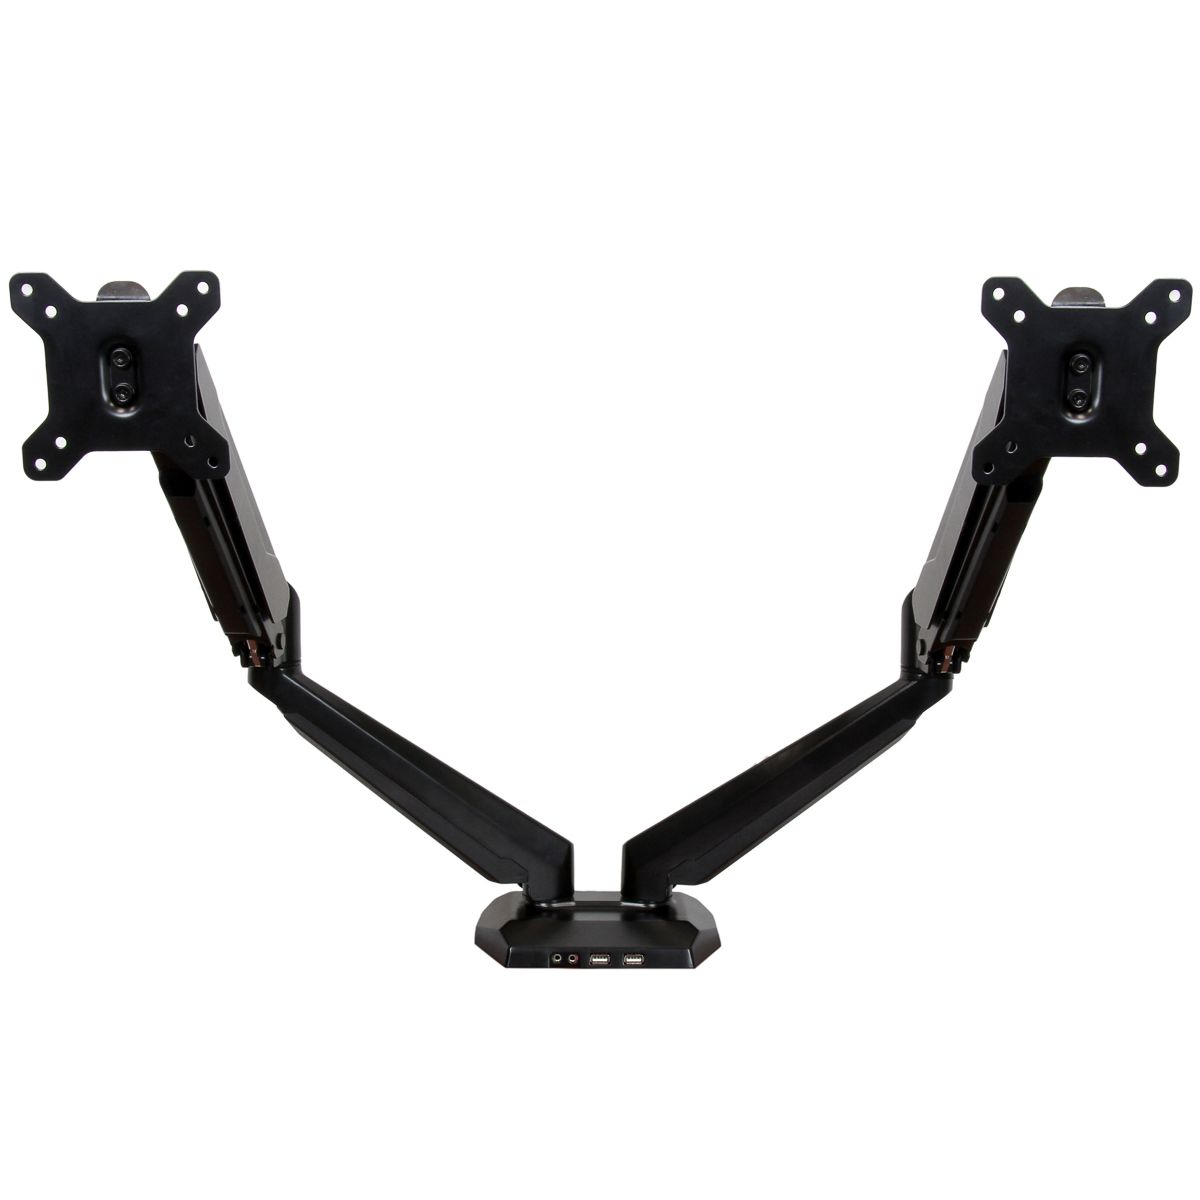 StarTech.com Monitor Arm for 2 x Screen, 30in Screen Size